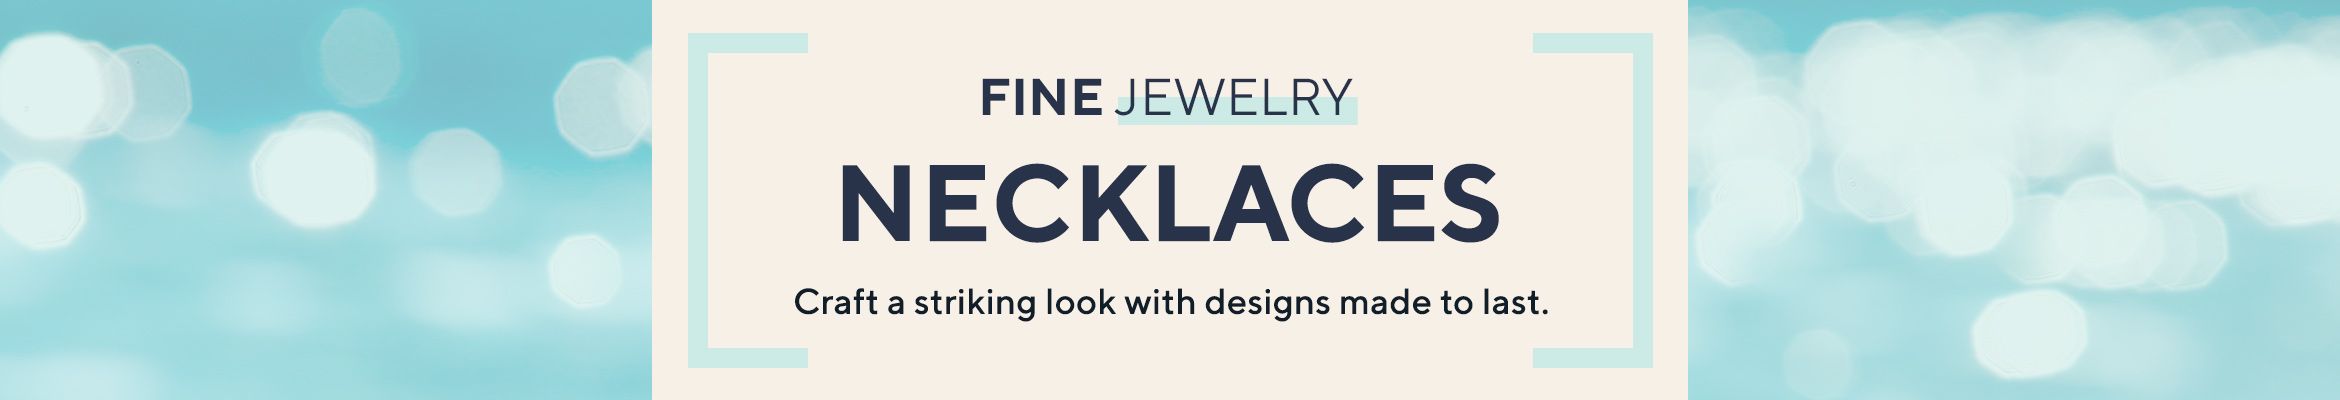 Fine Jewelry - Necklaces - Craft a striking look with designs made to last.